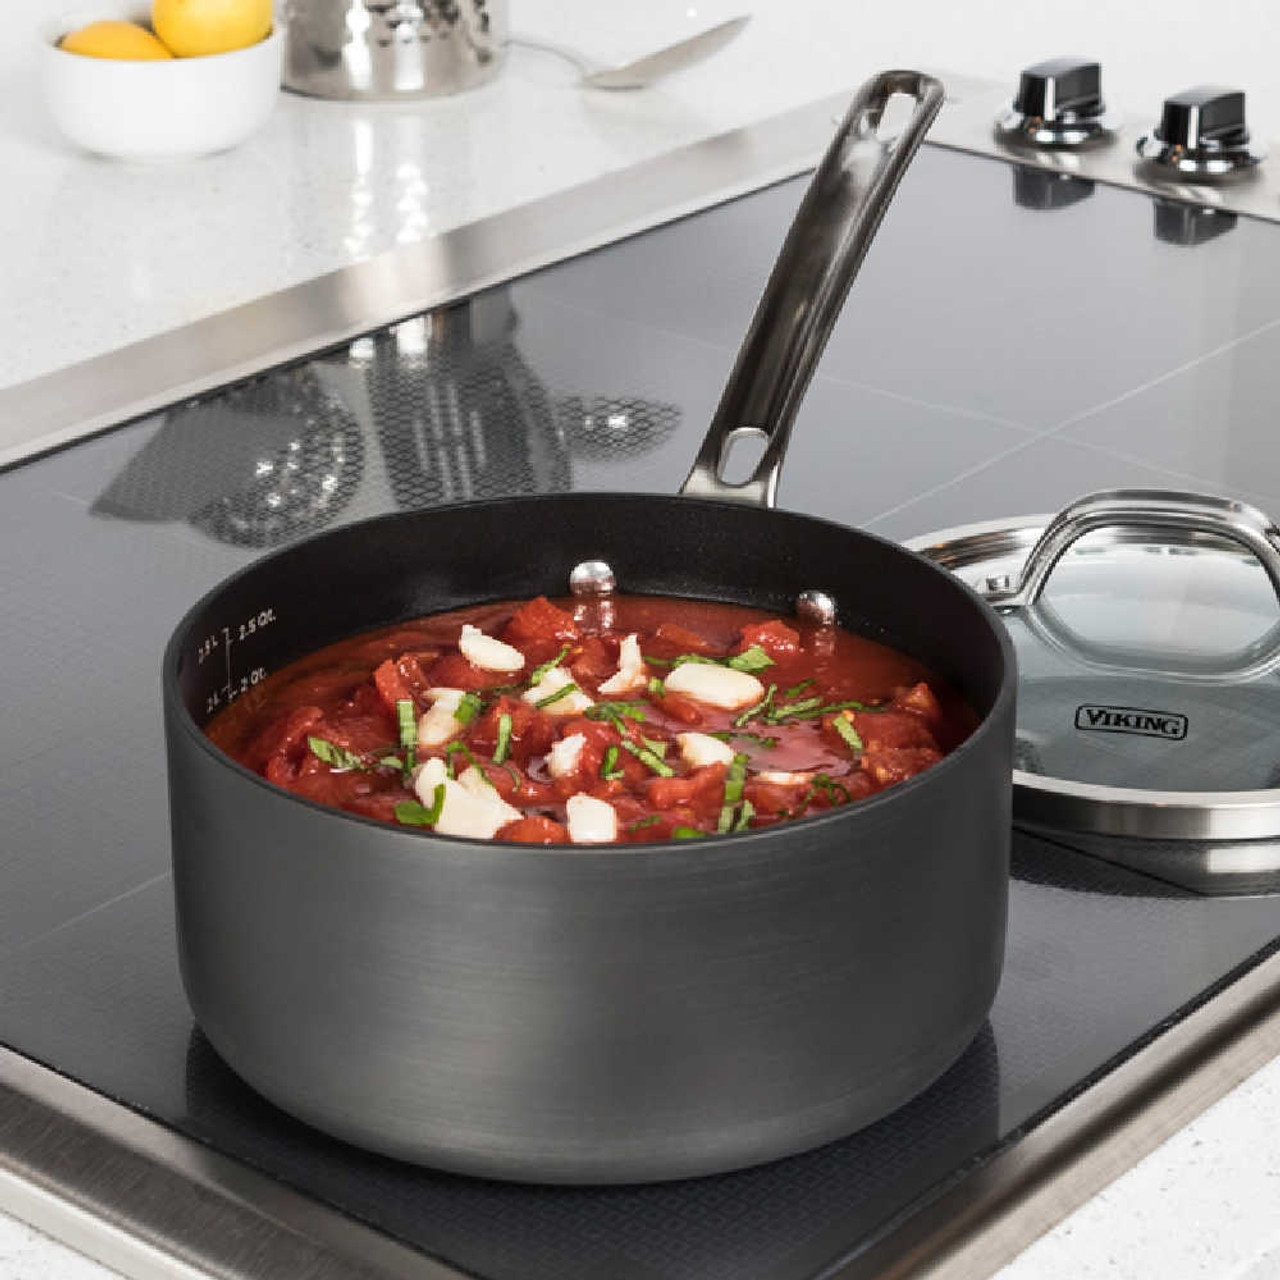 https://cdn11.bigcommerce.com/s-hccytny0od/images/stencil/1280x1280/products/4815/19710/Viking_Hard_Anodized_Nonstick_3-Quart_Sauce_Pan_2__13081.1656109019.jpg?c=2?imbypass=on